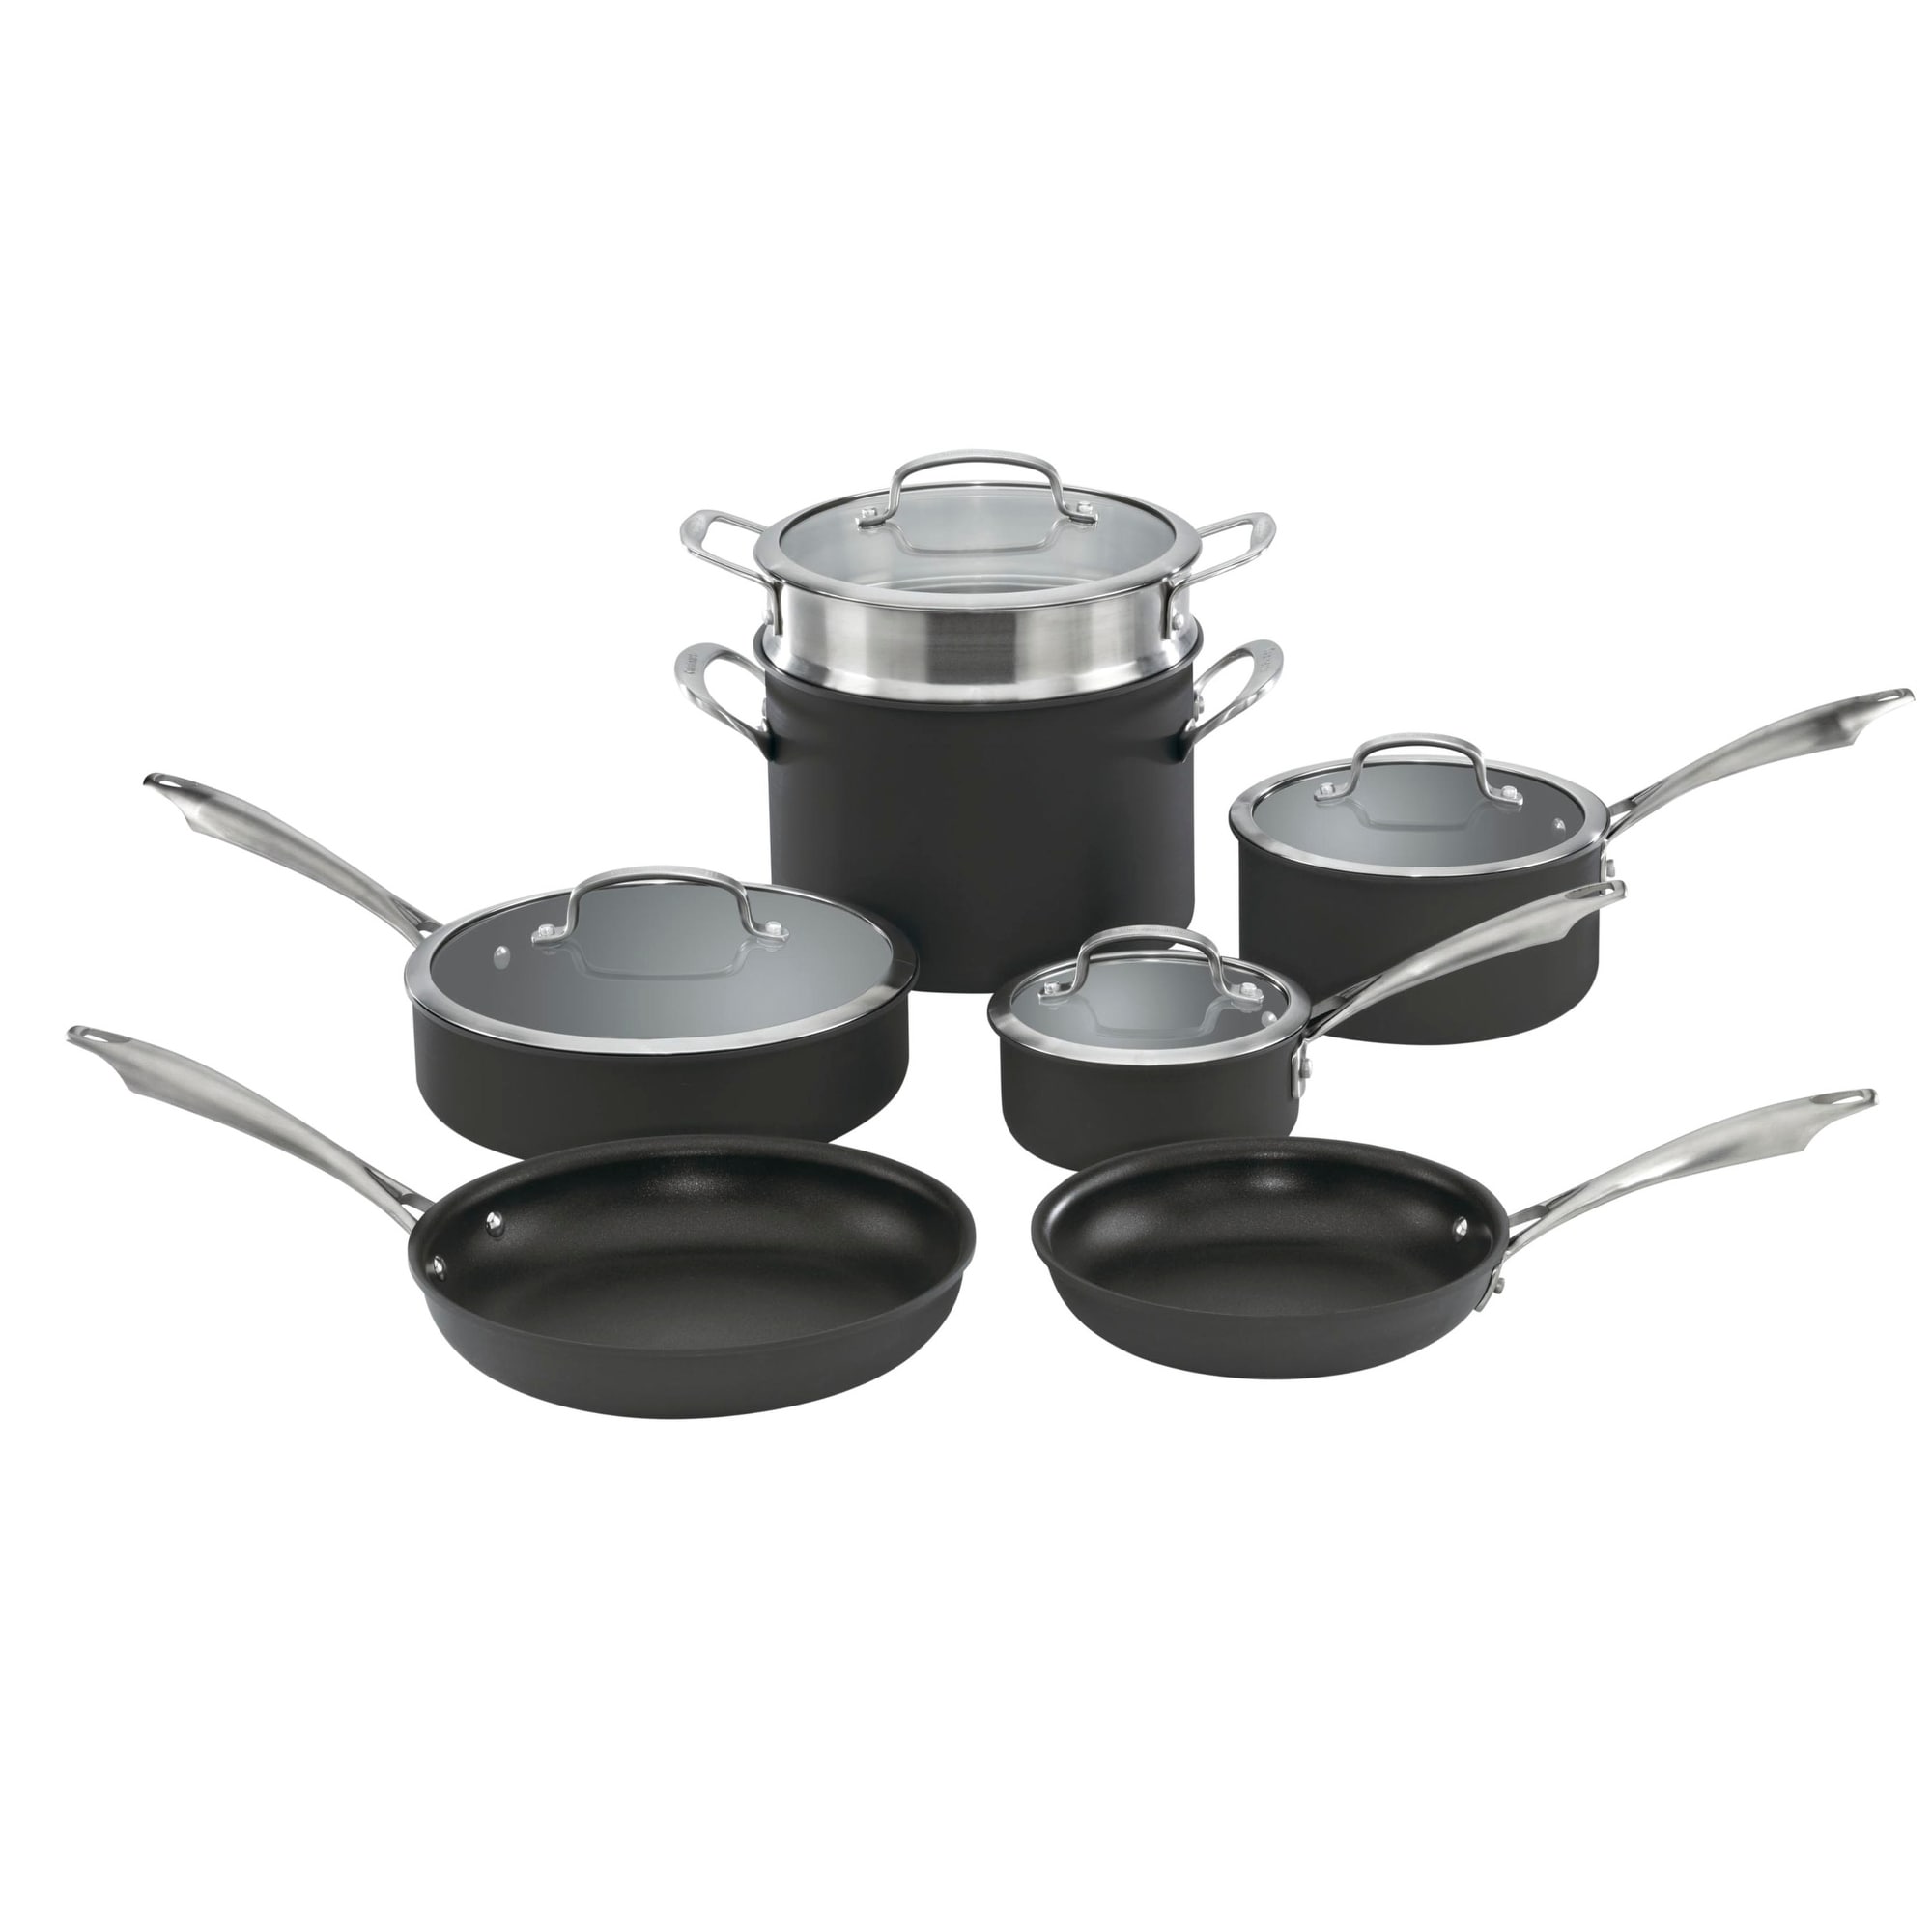 https://ak1.ostkcdn.com/images/products/is/images/direct/4ec7f0aba3ef30ee16a3911aec8031d2f0398526/Cuisinart-Dishwasher-Safe-Anodized-Cookware-11-Piece-Set.jpg